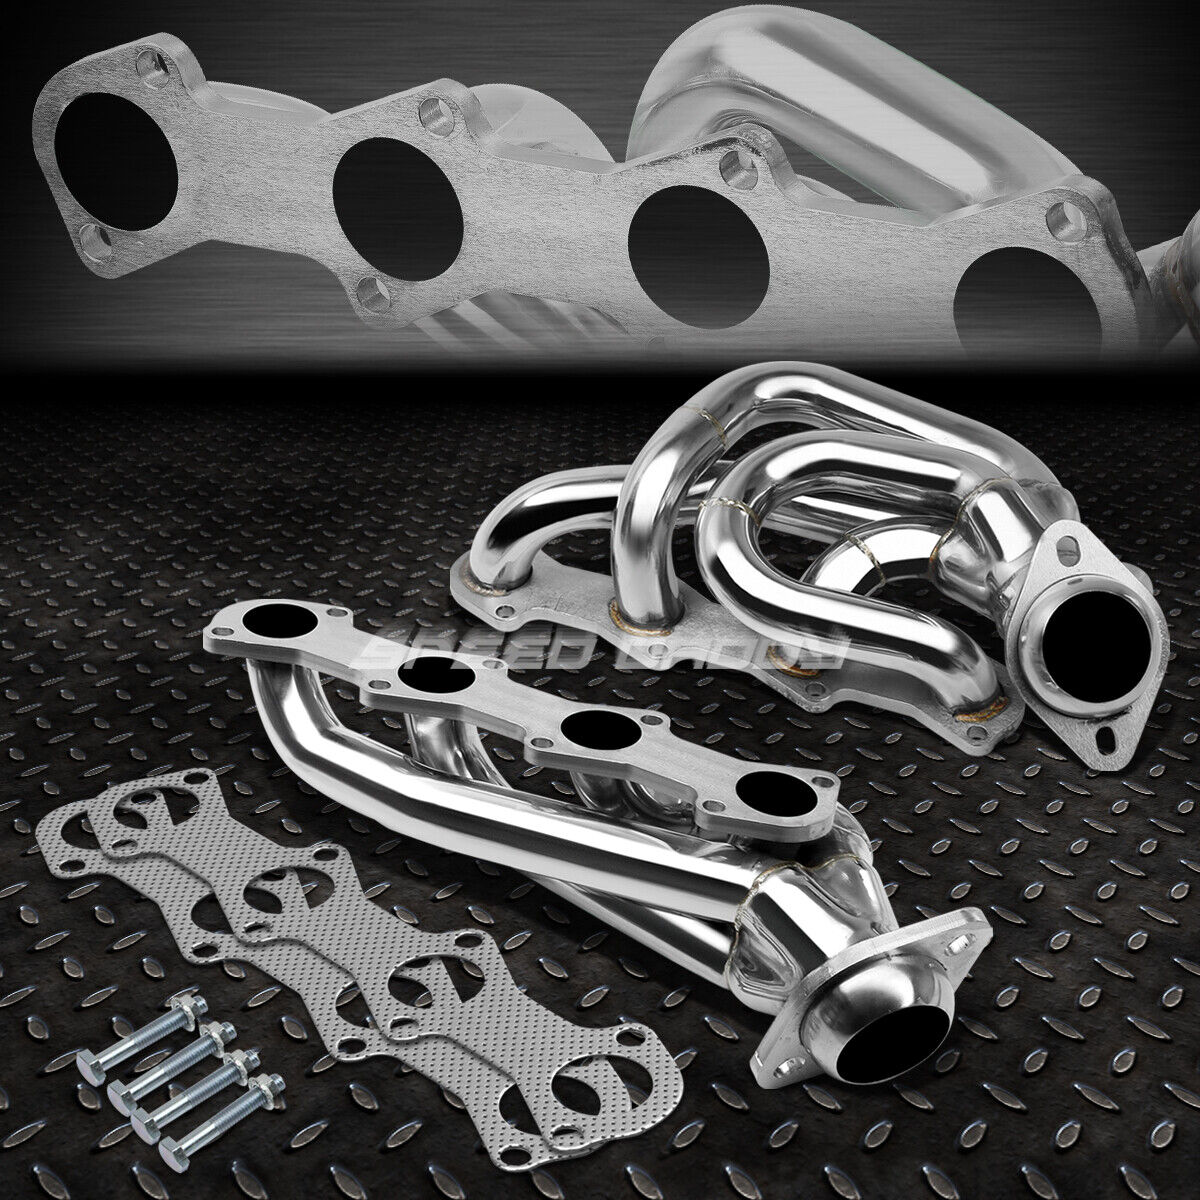 FOR 97-03 FORD F150 F250 EXPEDITION 5.4L V8 STAINLESS EXHAUST MANIFOLD HEADER